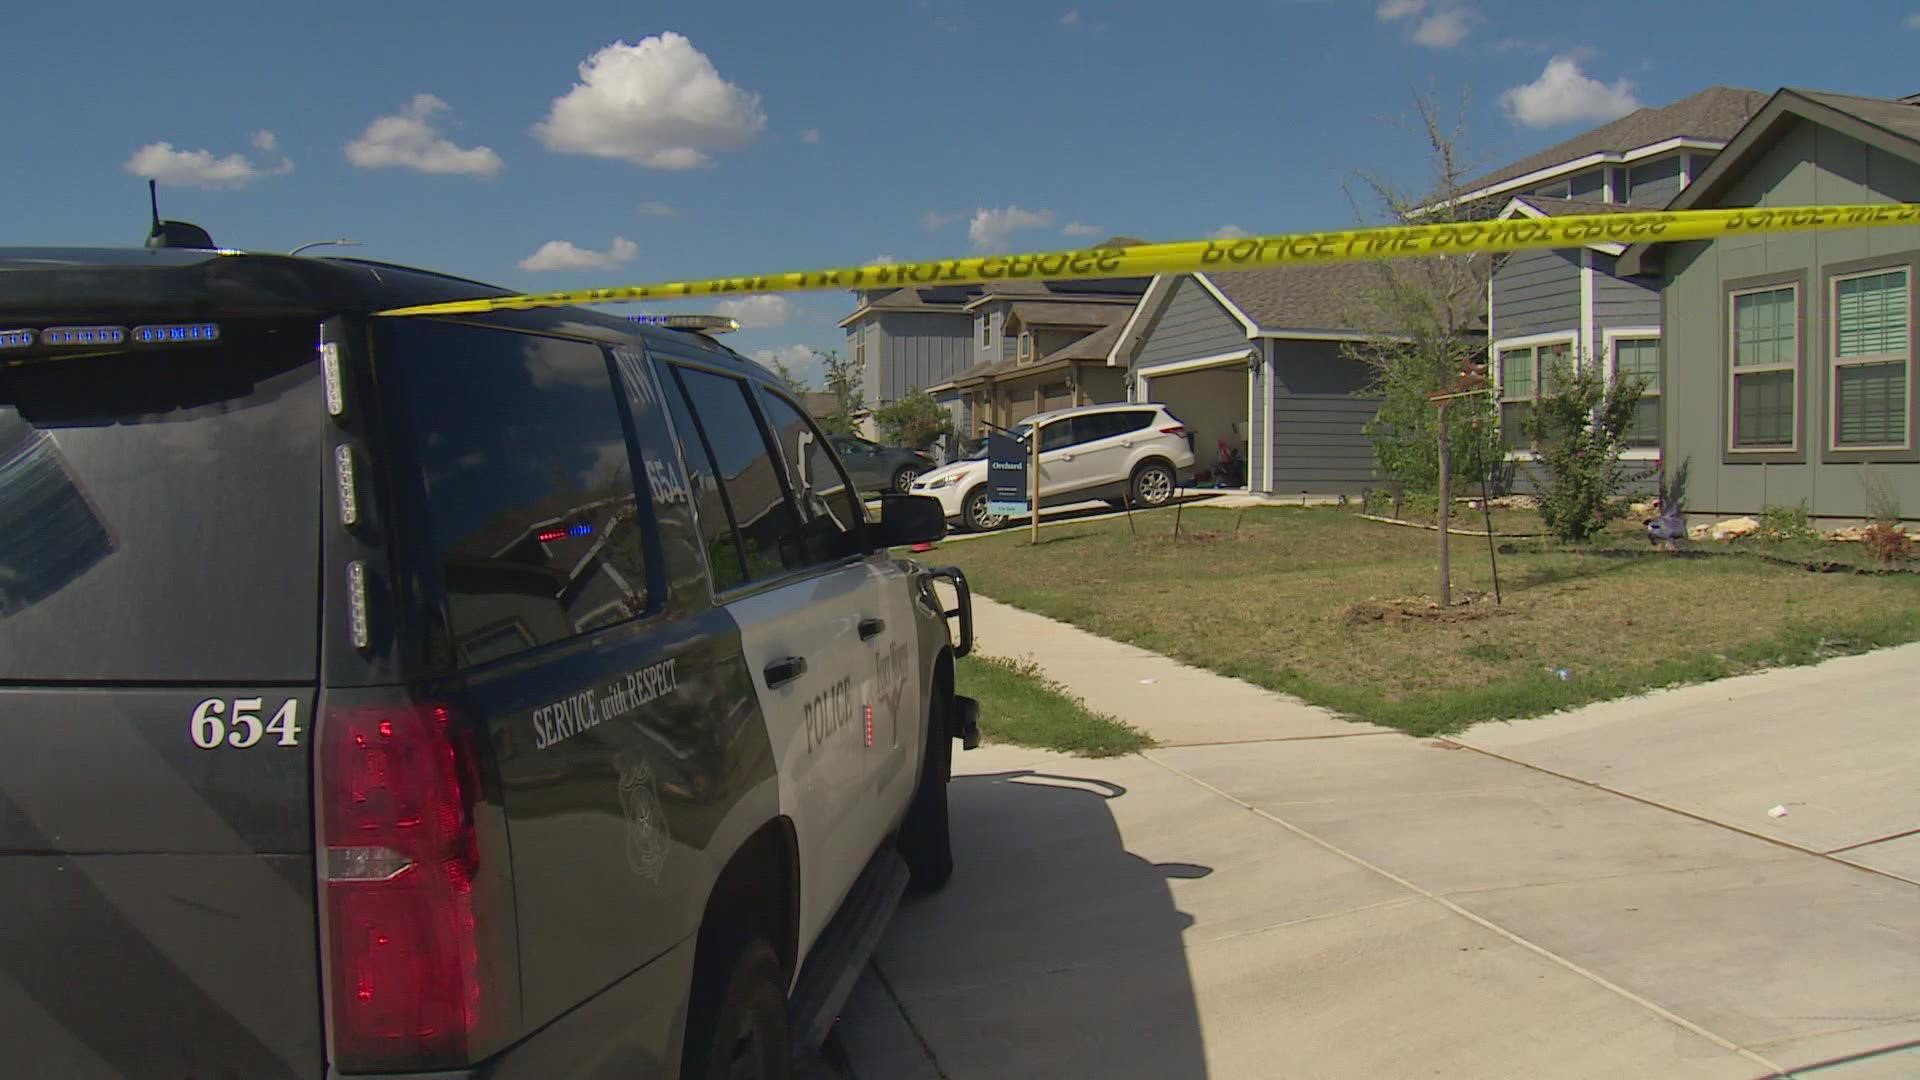 Here's the latest update on the Sunday afternoon shooting in northwest Fort Worth.